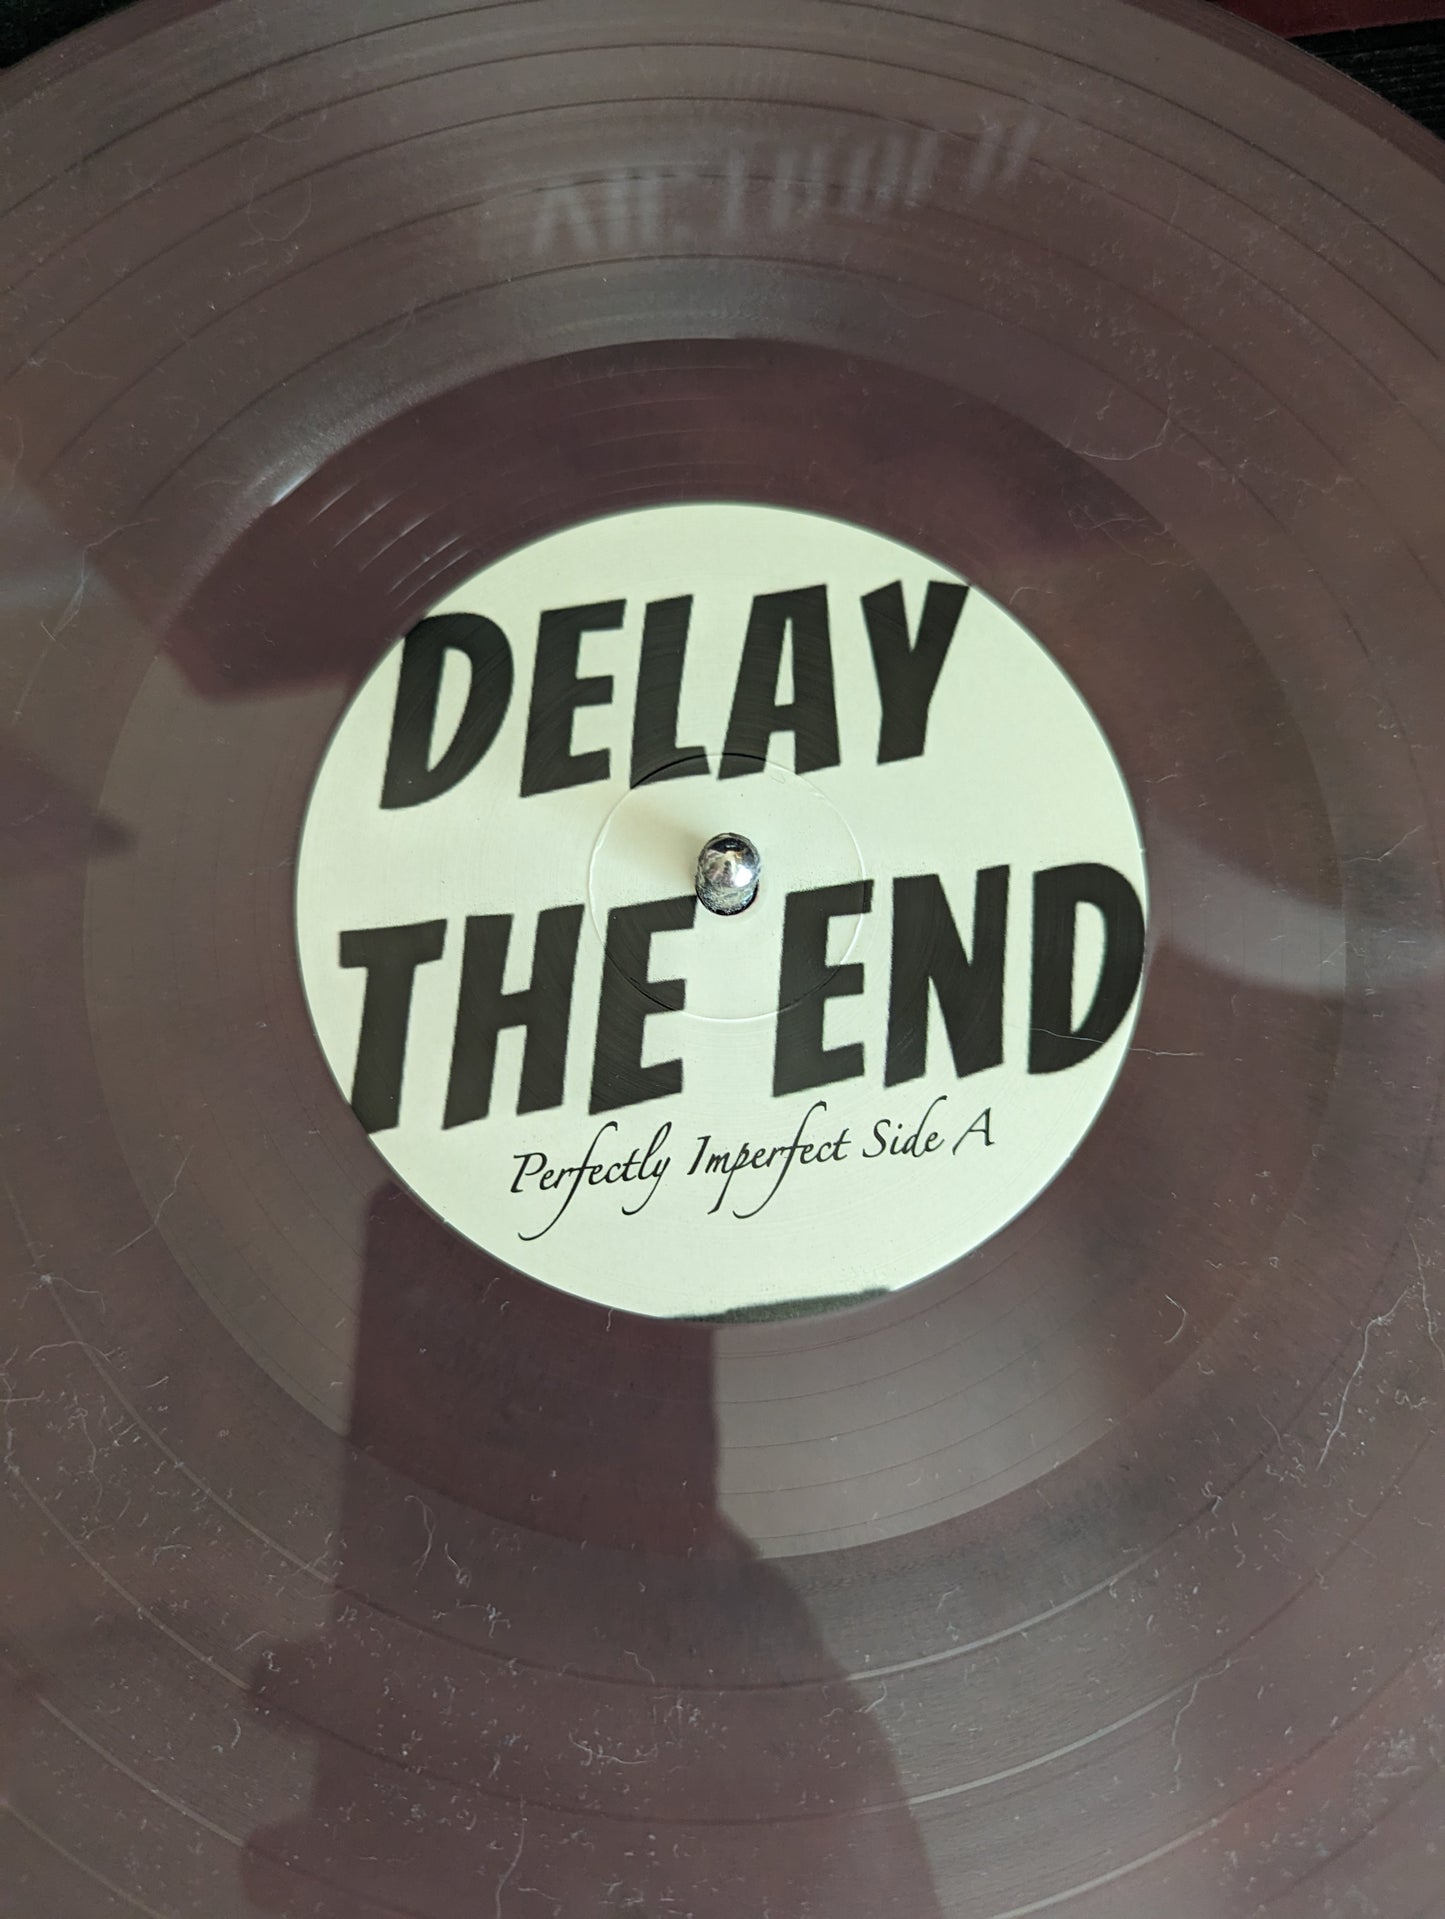 ***NEW** Delay the End - Perfectly Imperfect CD/Vinly Bundle